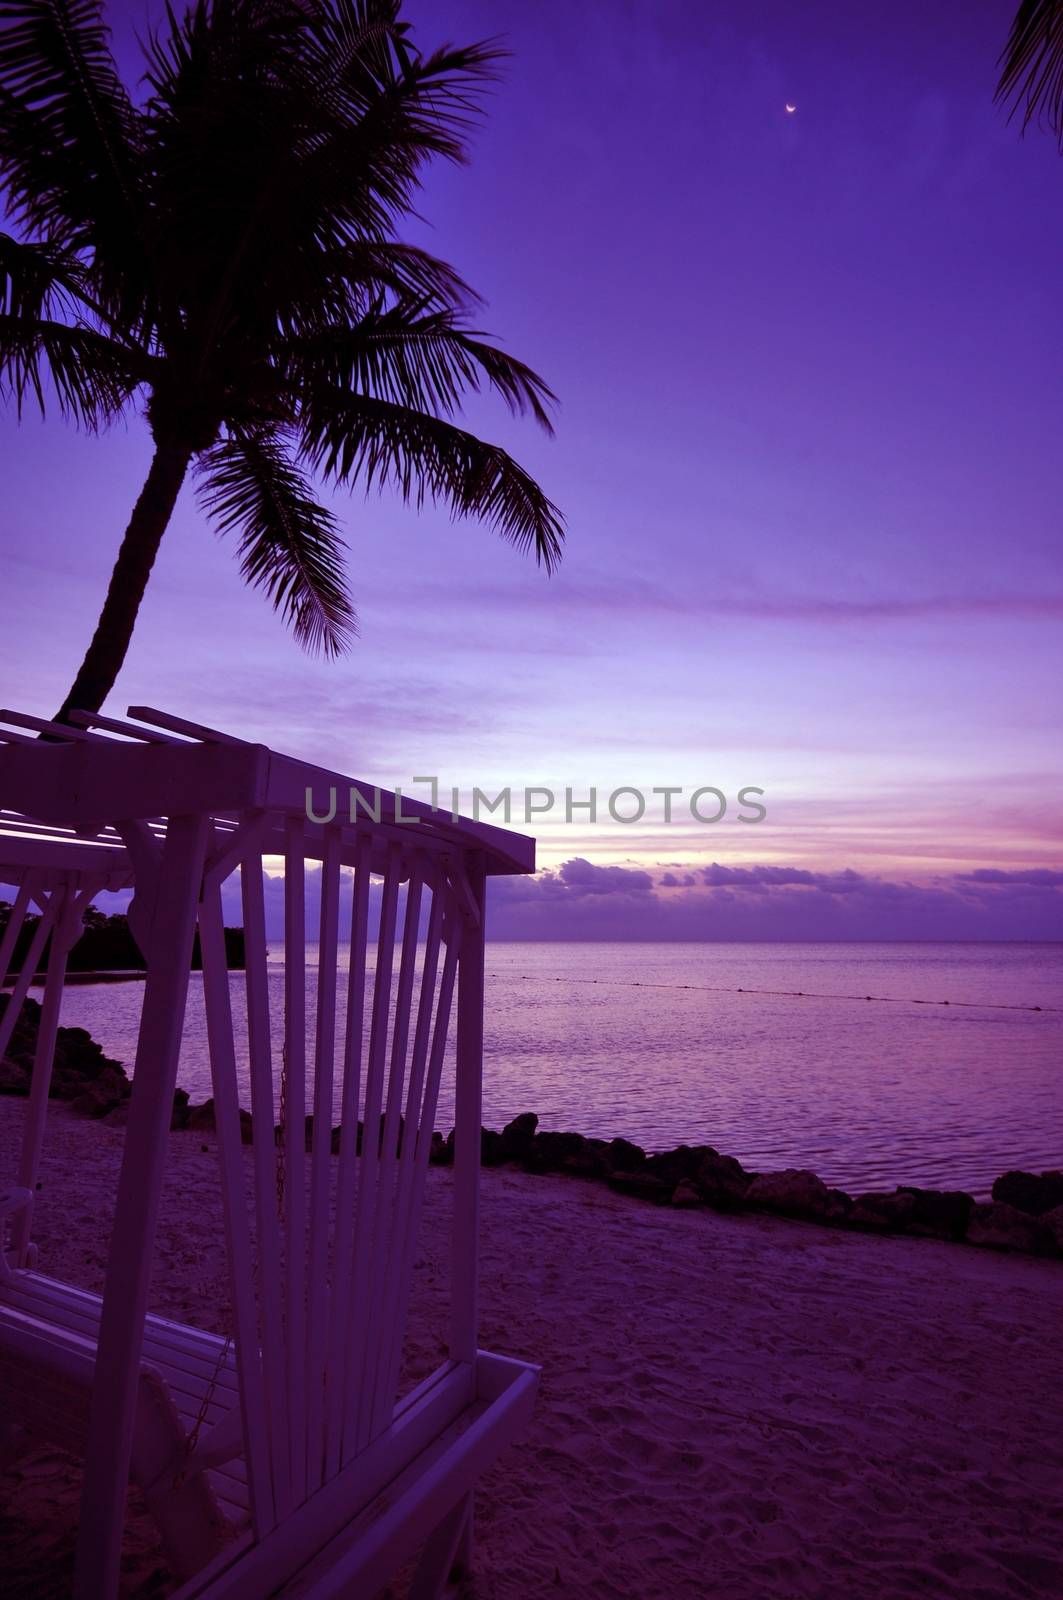 Relax in the Sunset. Tropical Sunset, Palm, Ocean, Bench and the Beach. Pinky Sunset in Some Tropical Place.